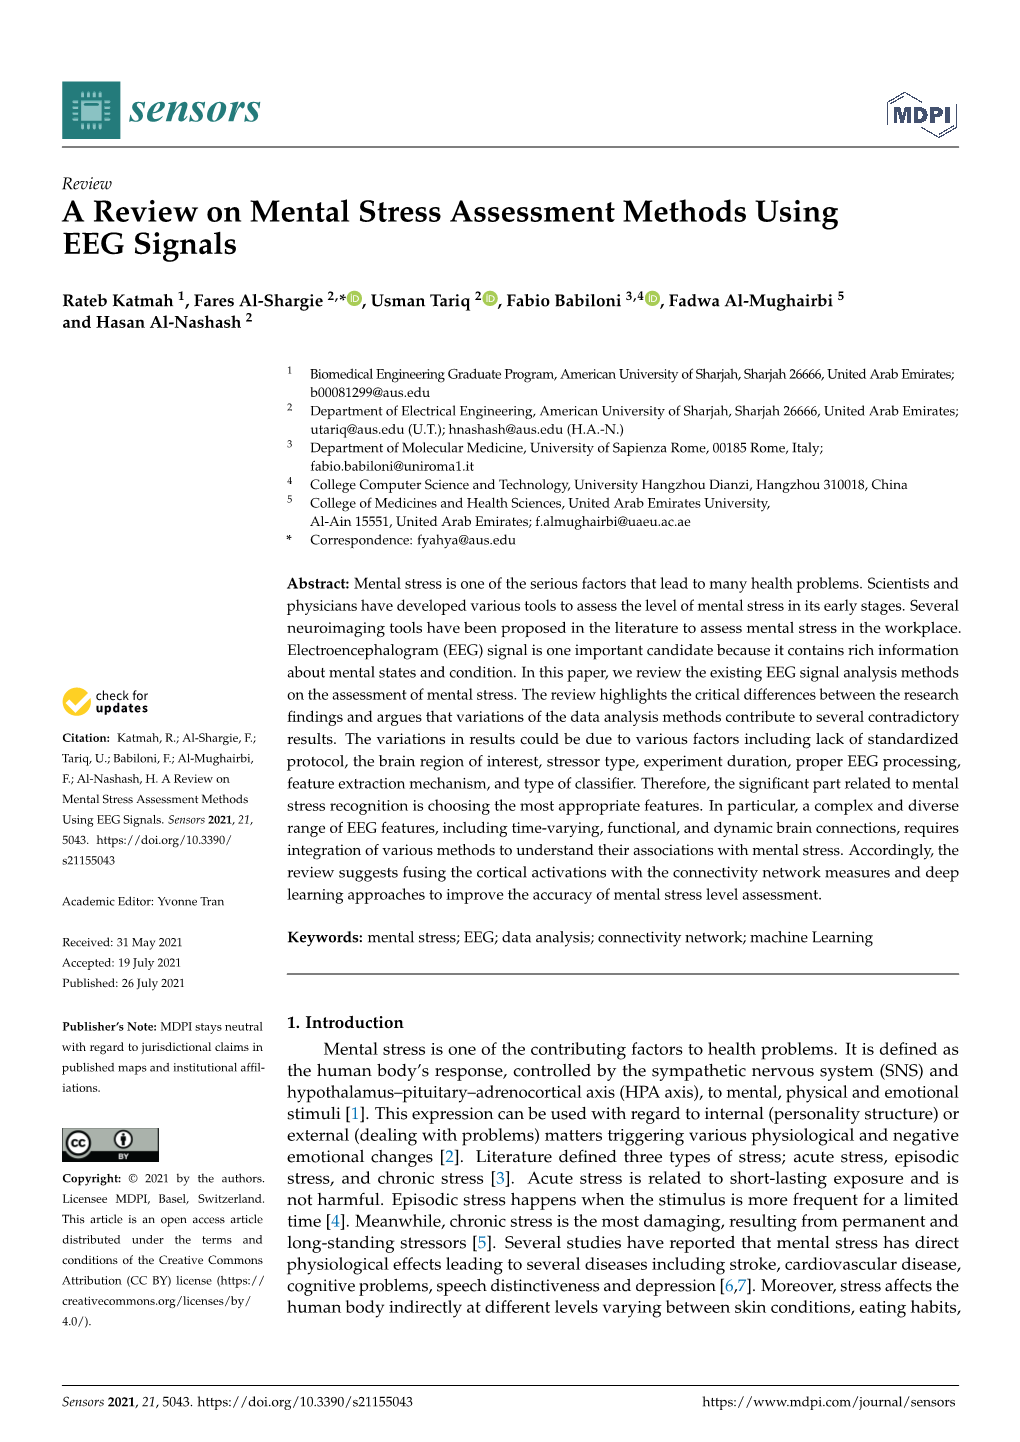 A Review on Mental Stress Assessment Methods Using EEG Signals